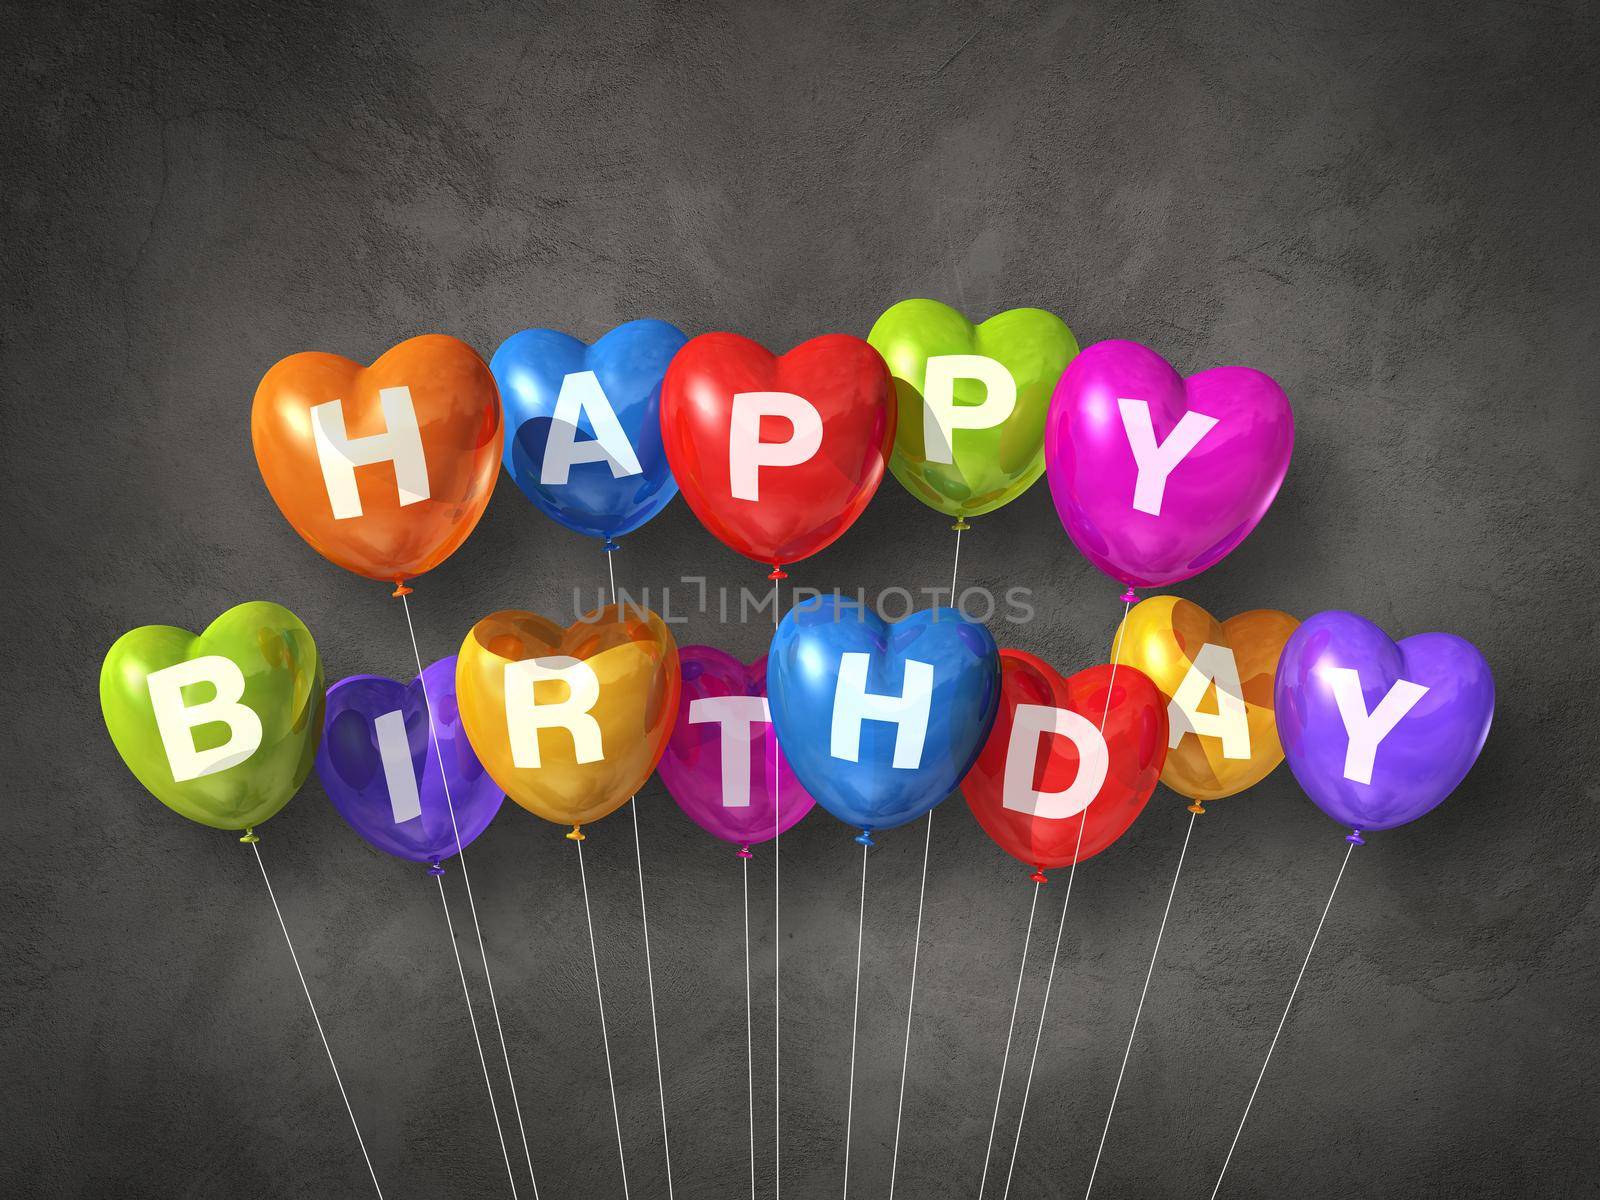 Colorful happy birthday heart shape air balloons on a concrete background. 3D illustration render